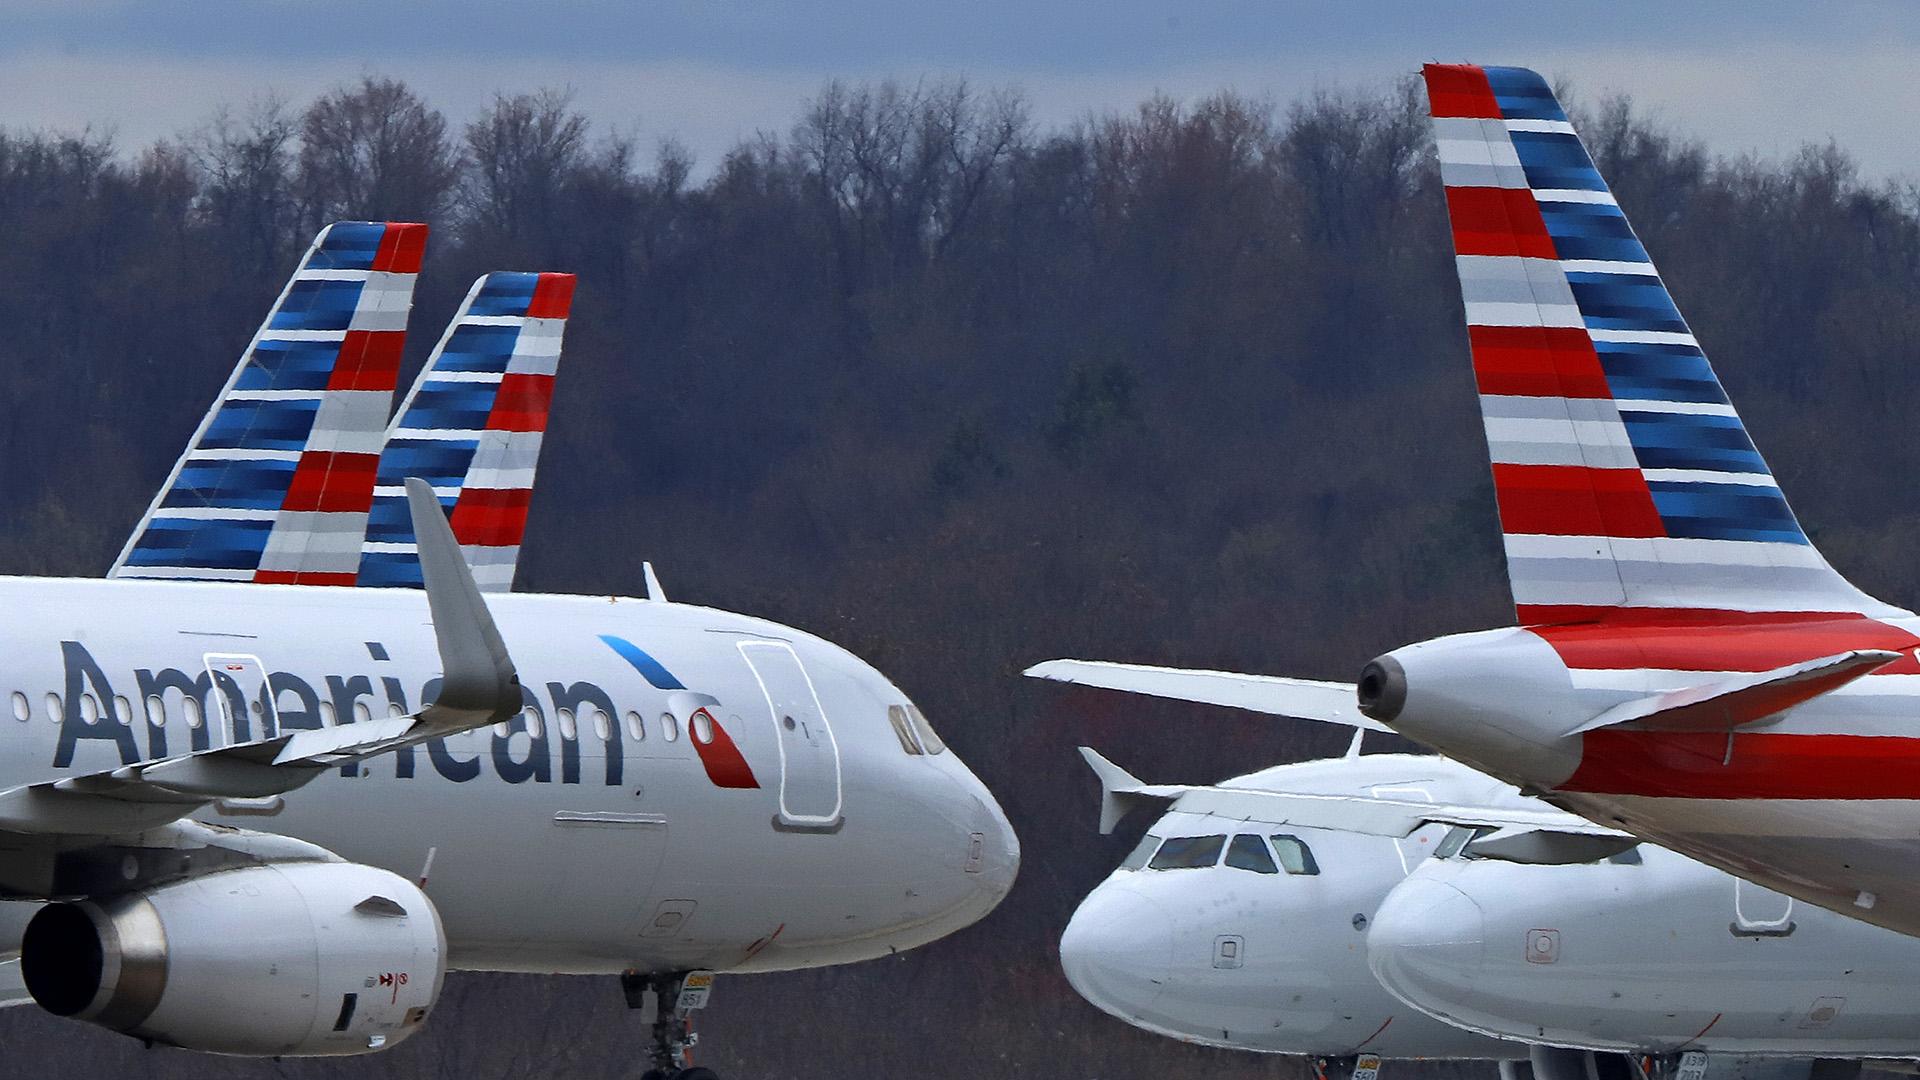 In this March 31, 2020 file photo American Airlines planes are parked at Pittsburgh International Airport in Imperial, Pa. (AP Photo / Gene J. Puskar, file)